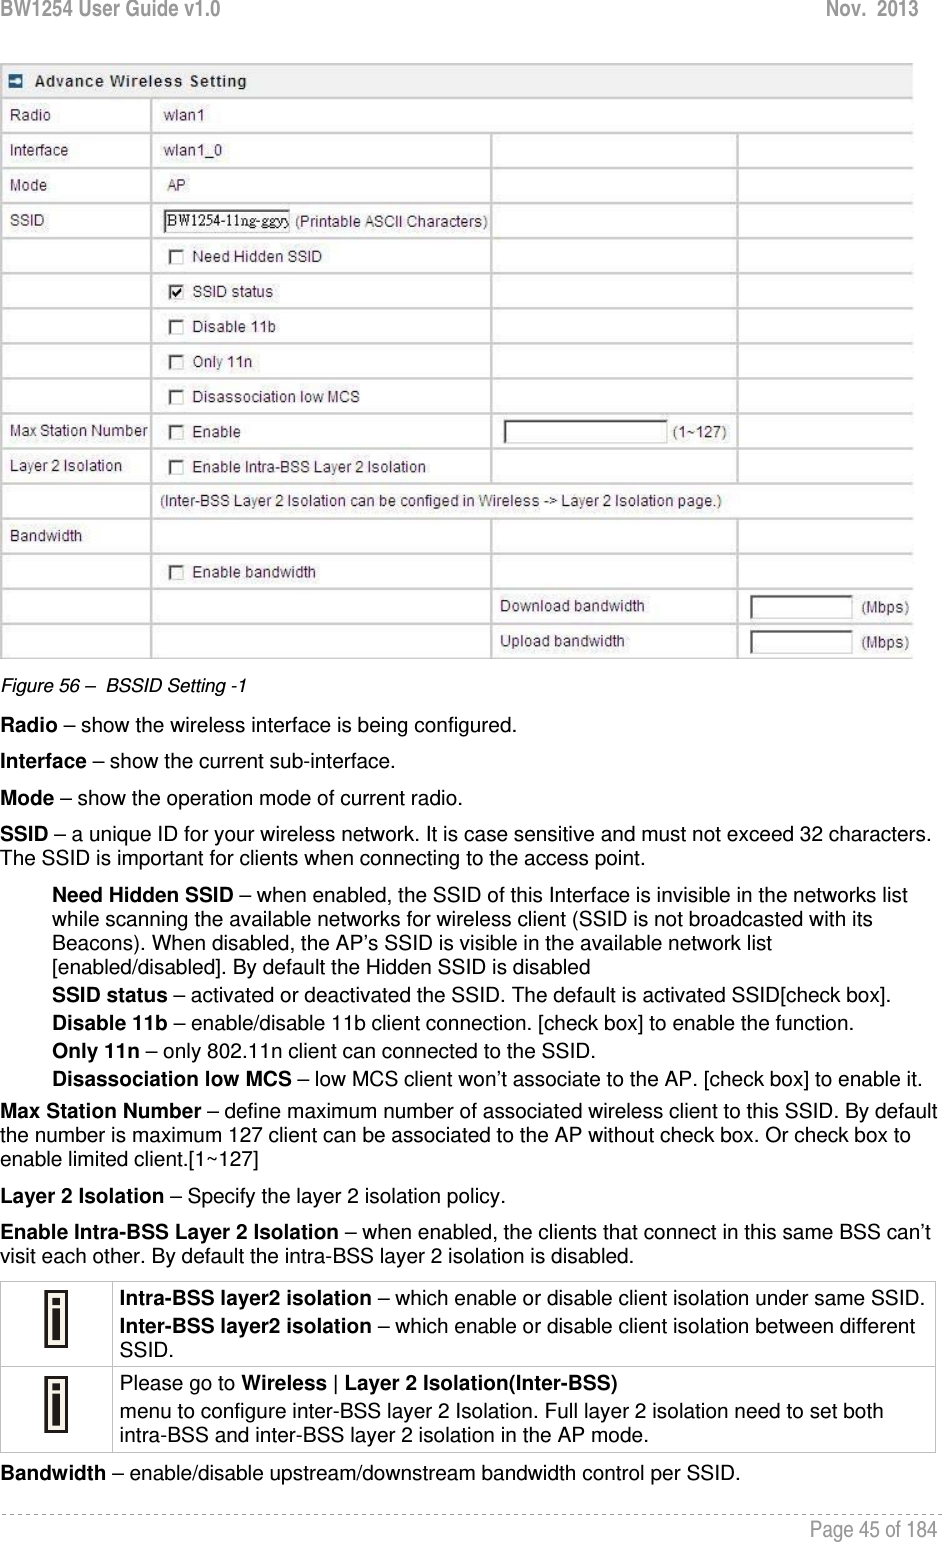 BW1254 User Guide v1.0  Nov.  2013     Page 45 of 184    Figure 56 –  BSSID Setting -1 Radio – show the wireless interface is being configured. Interface – show the current sub-interface. Mode – show the operation mode of current radio. SSID – a unique ID for your wireless network. It is case sensitive and must not exceed 32 characters. The SSID is important for clients when connecting to the access point.  Need Hidden SSID – when enabled, the SSID of this Interface is invisible in the networks list while scanning the available networks for wireless client (SSID is not broadcasted with its Beacons). When disabled, the AP’s SSID is visible in the available network list [enabled/disabled]. By default the Hidden SSID is disabled SSID status – activated or deactivated the SSID. The default is activated SSID[check box]. Disable 11b – enable/disable 11b client connection. [check box] to enable the function. Only 11n – only 802.11n client can connected to the SSID. Disassociation low MCS – low MCS client won’t associate to the AP. [check box] to enable it. Max Station Number – define maximum number of associated wireless client to this SSID. By default the number is maximum 127 client can be associated to the AP without check box. Or check box to enable limited client.[1~127] Layer 2 Isolation – Specify the layer 2 isolation policy. Enable Intra-BSS Layer 2 Isolation – when enabled, the clients that connect in this same BSS can’t visit each other. By default the intra-BSS layer 2 isolation is disabled.  Intra-BSS layer2 isolation – which enable or disable client isolation under same SSID.Inter-BSS layer2 isolation – which enable or disable client isolation between different SSID.  Please go to Wireless | Layer 2 Isolation(Inter-BSS) menu to configure inter-BSS layer 2 Isolation. Full layer 2 isolation need to set both intra-BSS and inter-BSS layer 2 isolation in the AP mode. Bandwidth – enable/disable upstream/downstream bandwidth control per SSID. 